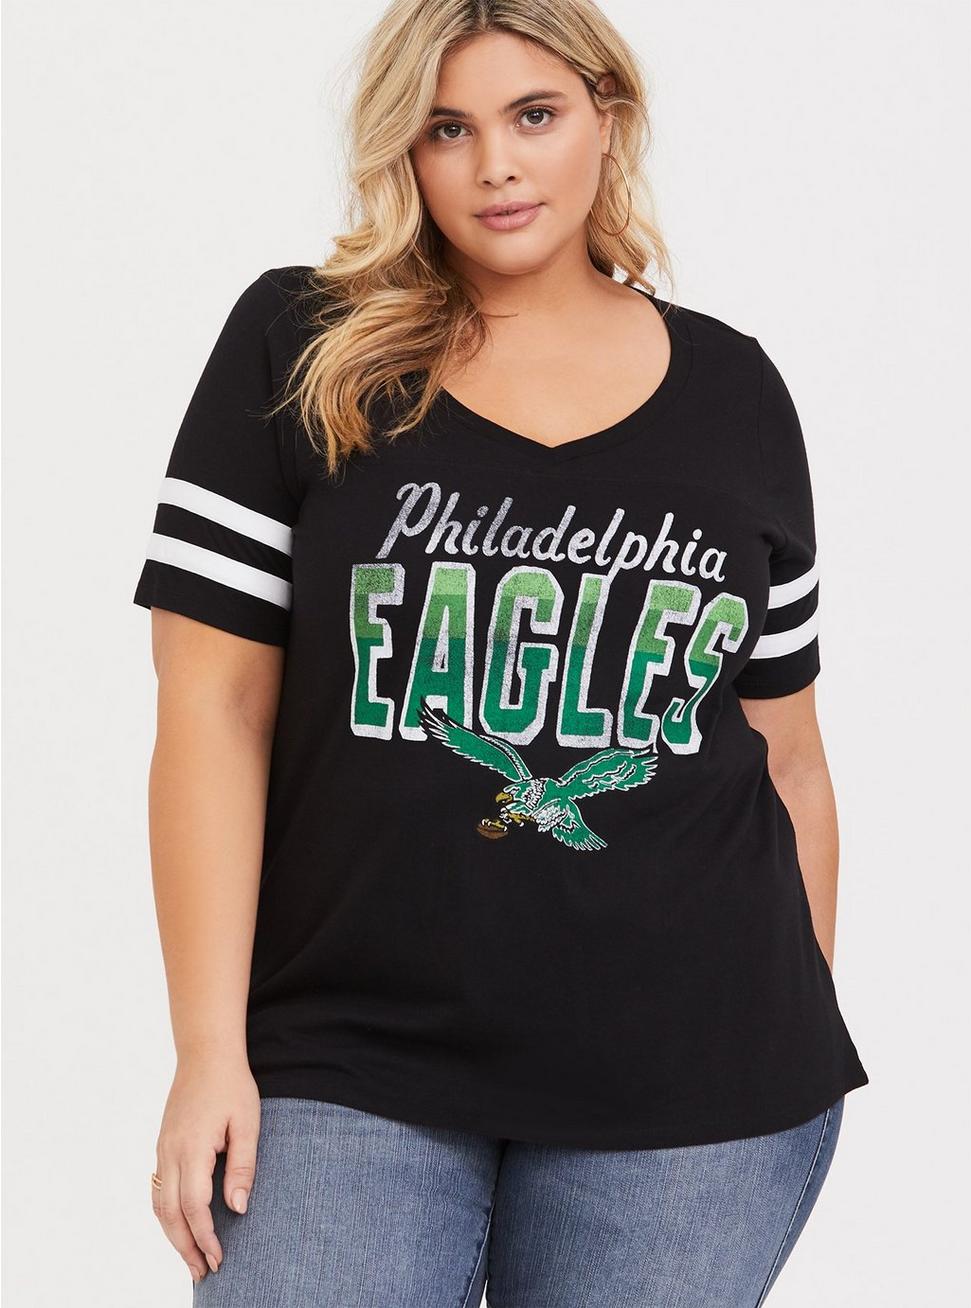 6x eagles jersey